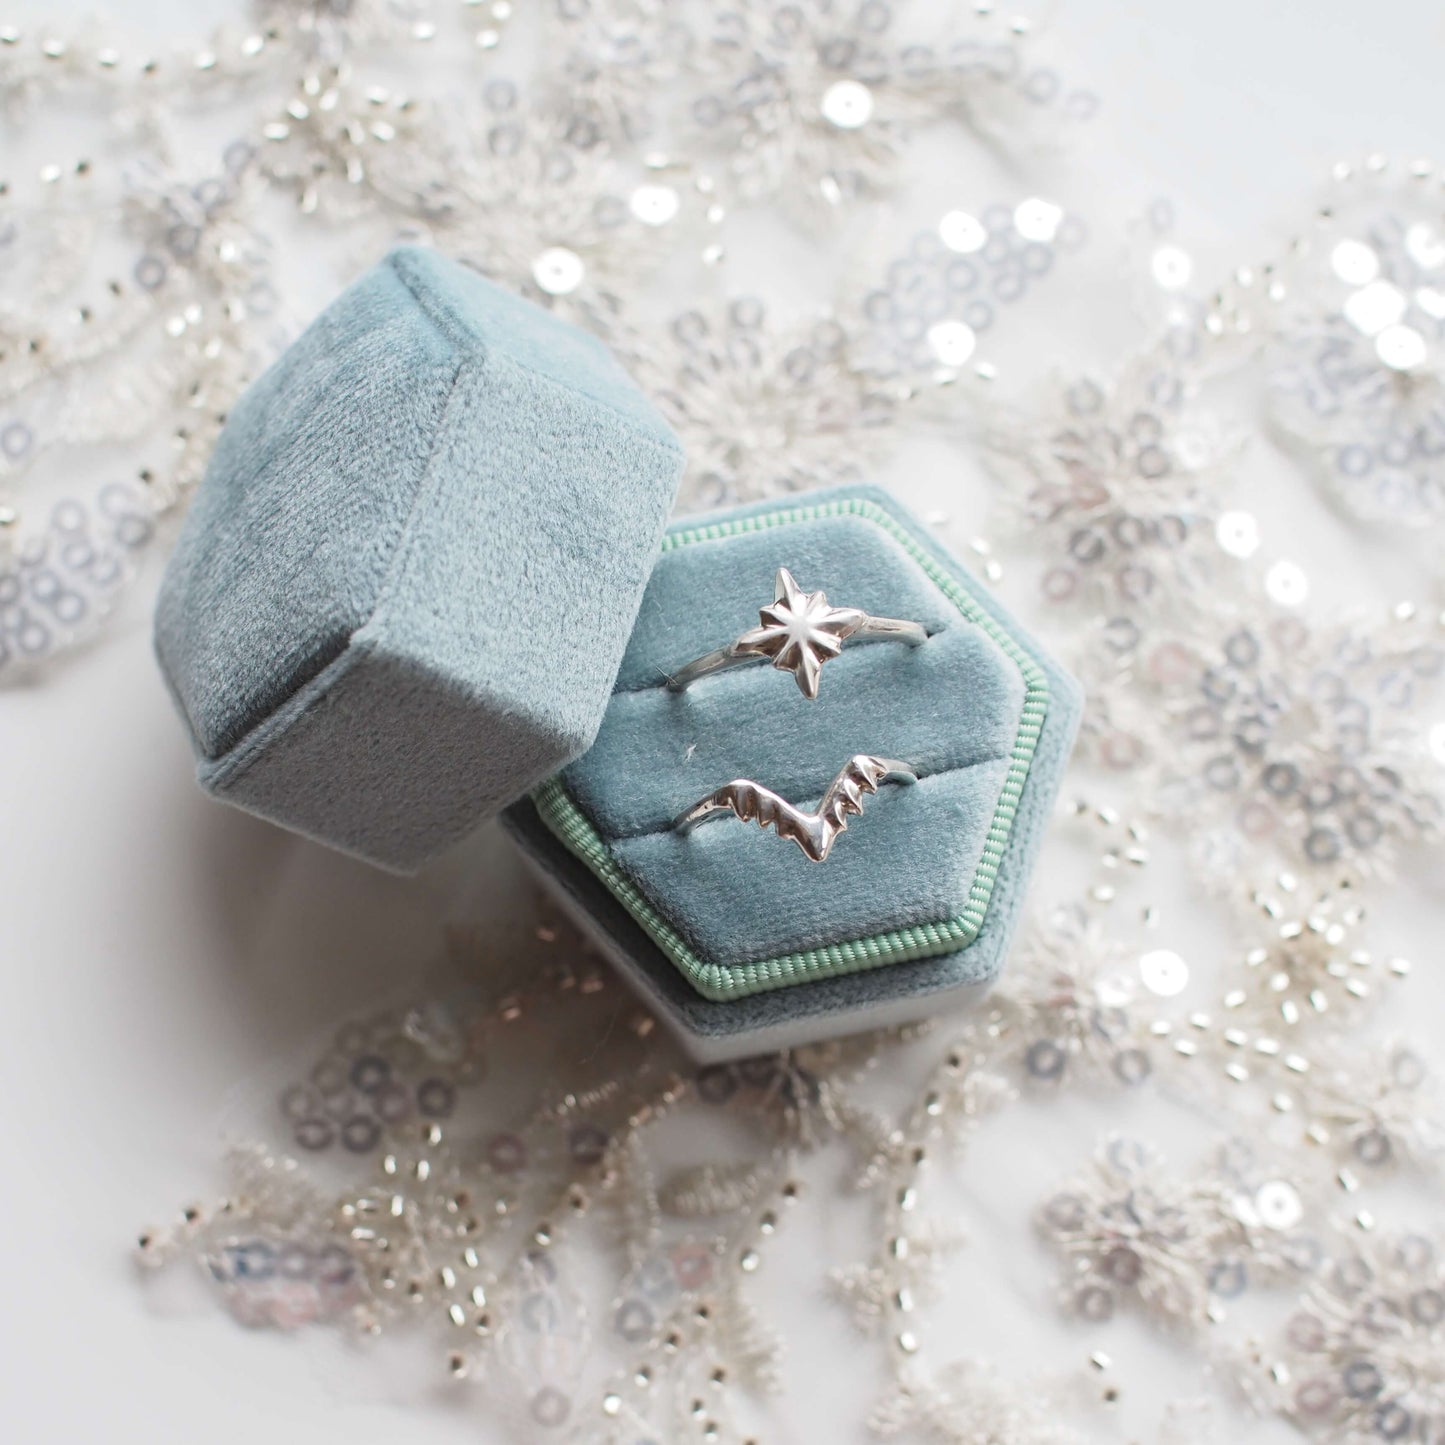 Celestial North Star Ring and nesting band in sterling silver held in eucalyptus blue velvet ring box on top of bridal lace